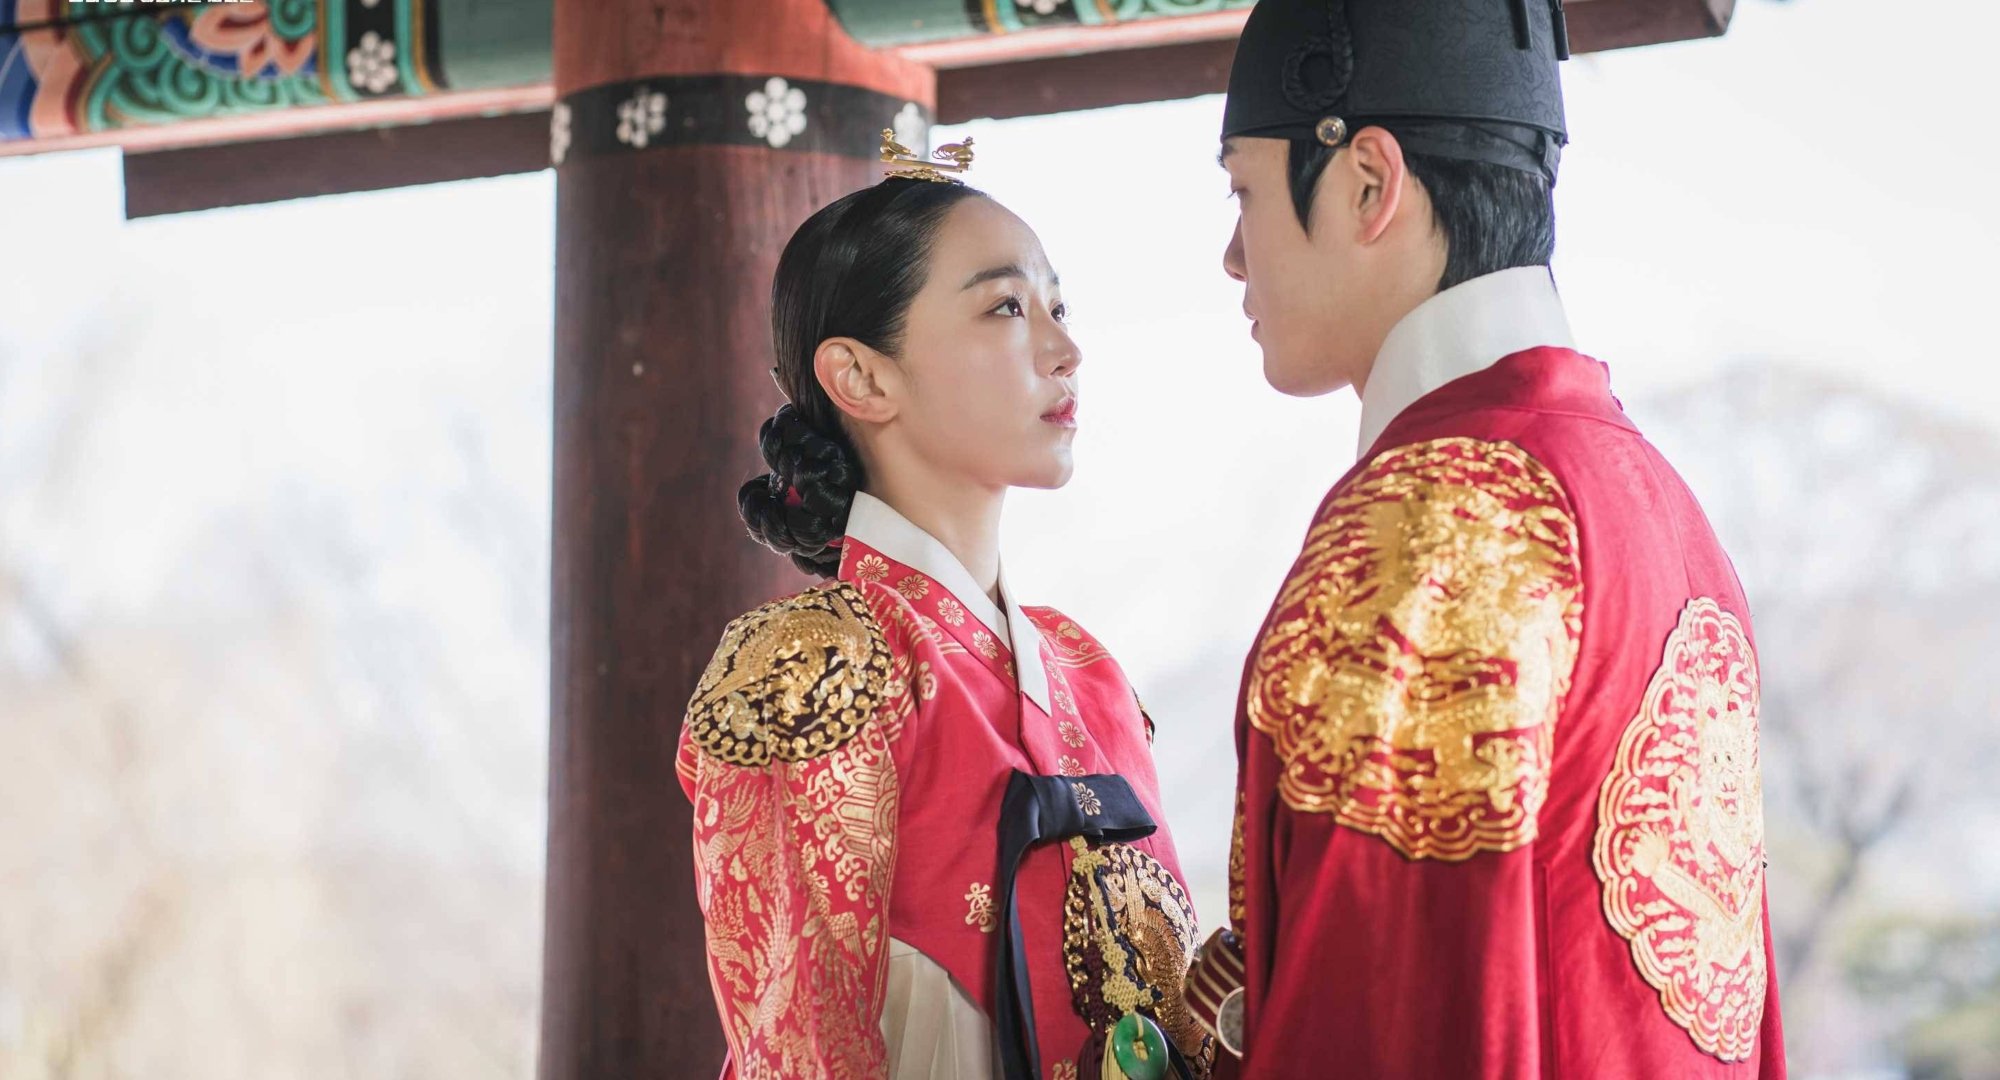 5 of the Best Historical Romance K-Dramas – Ranked